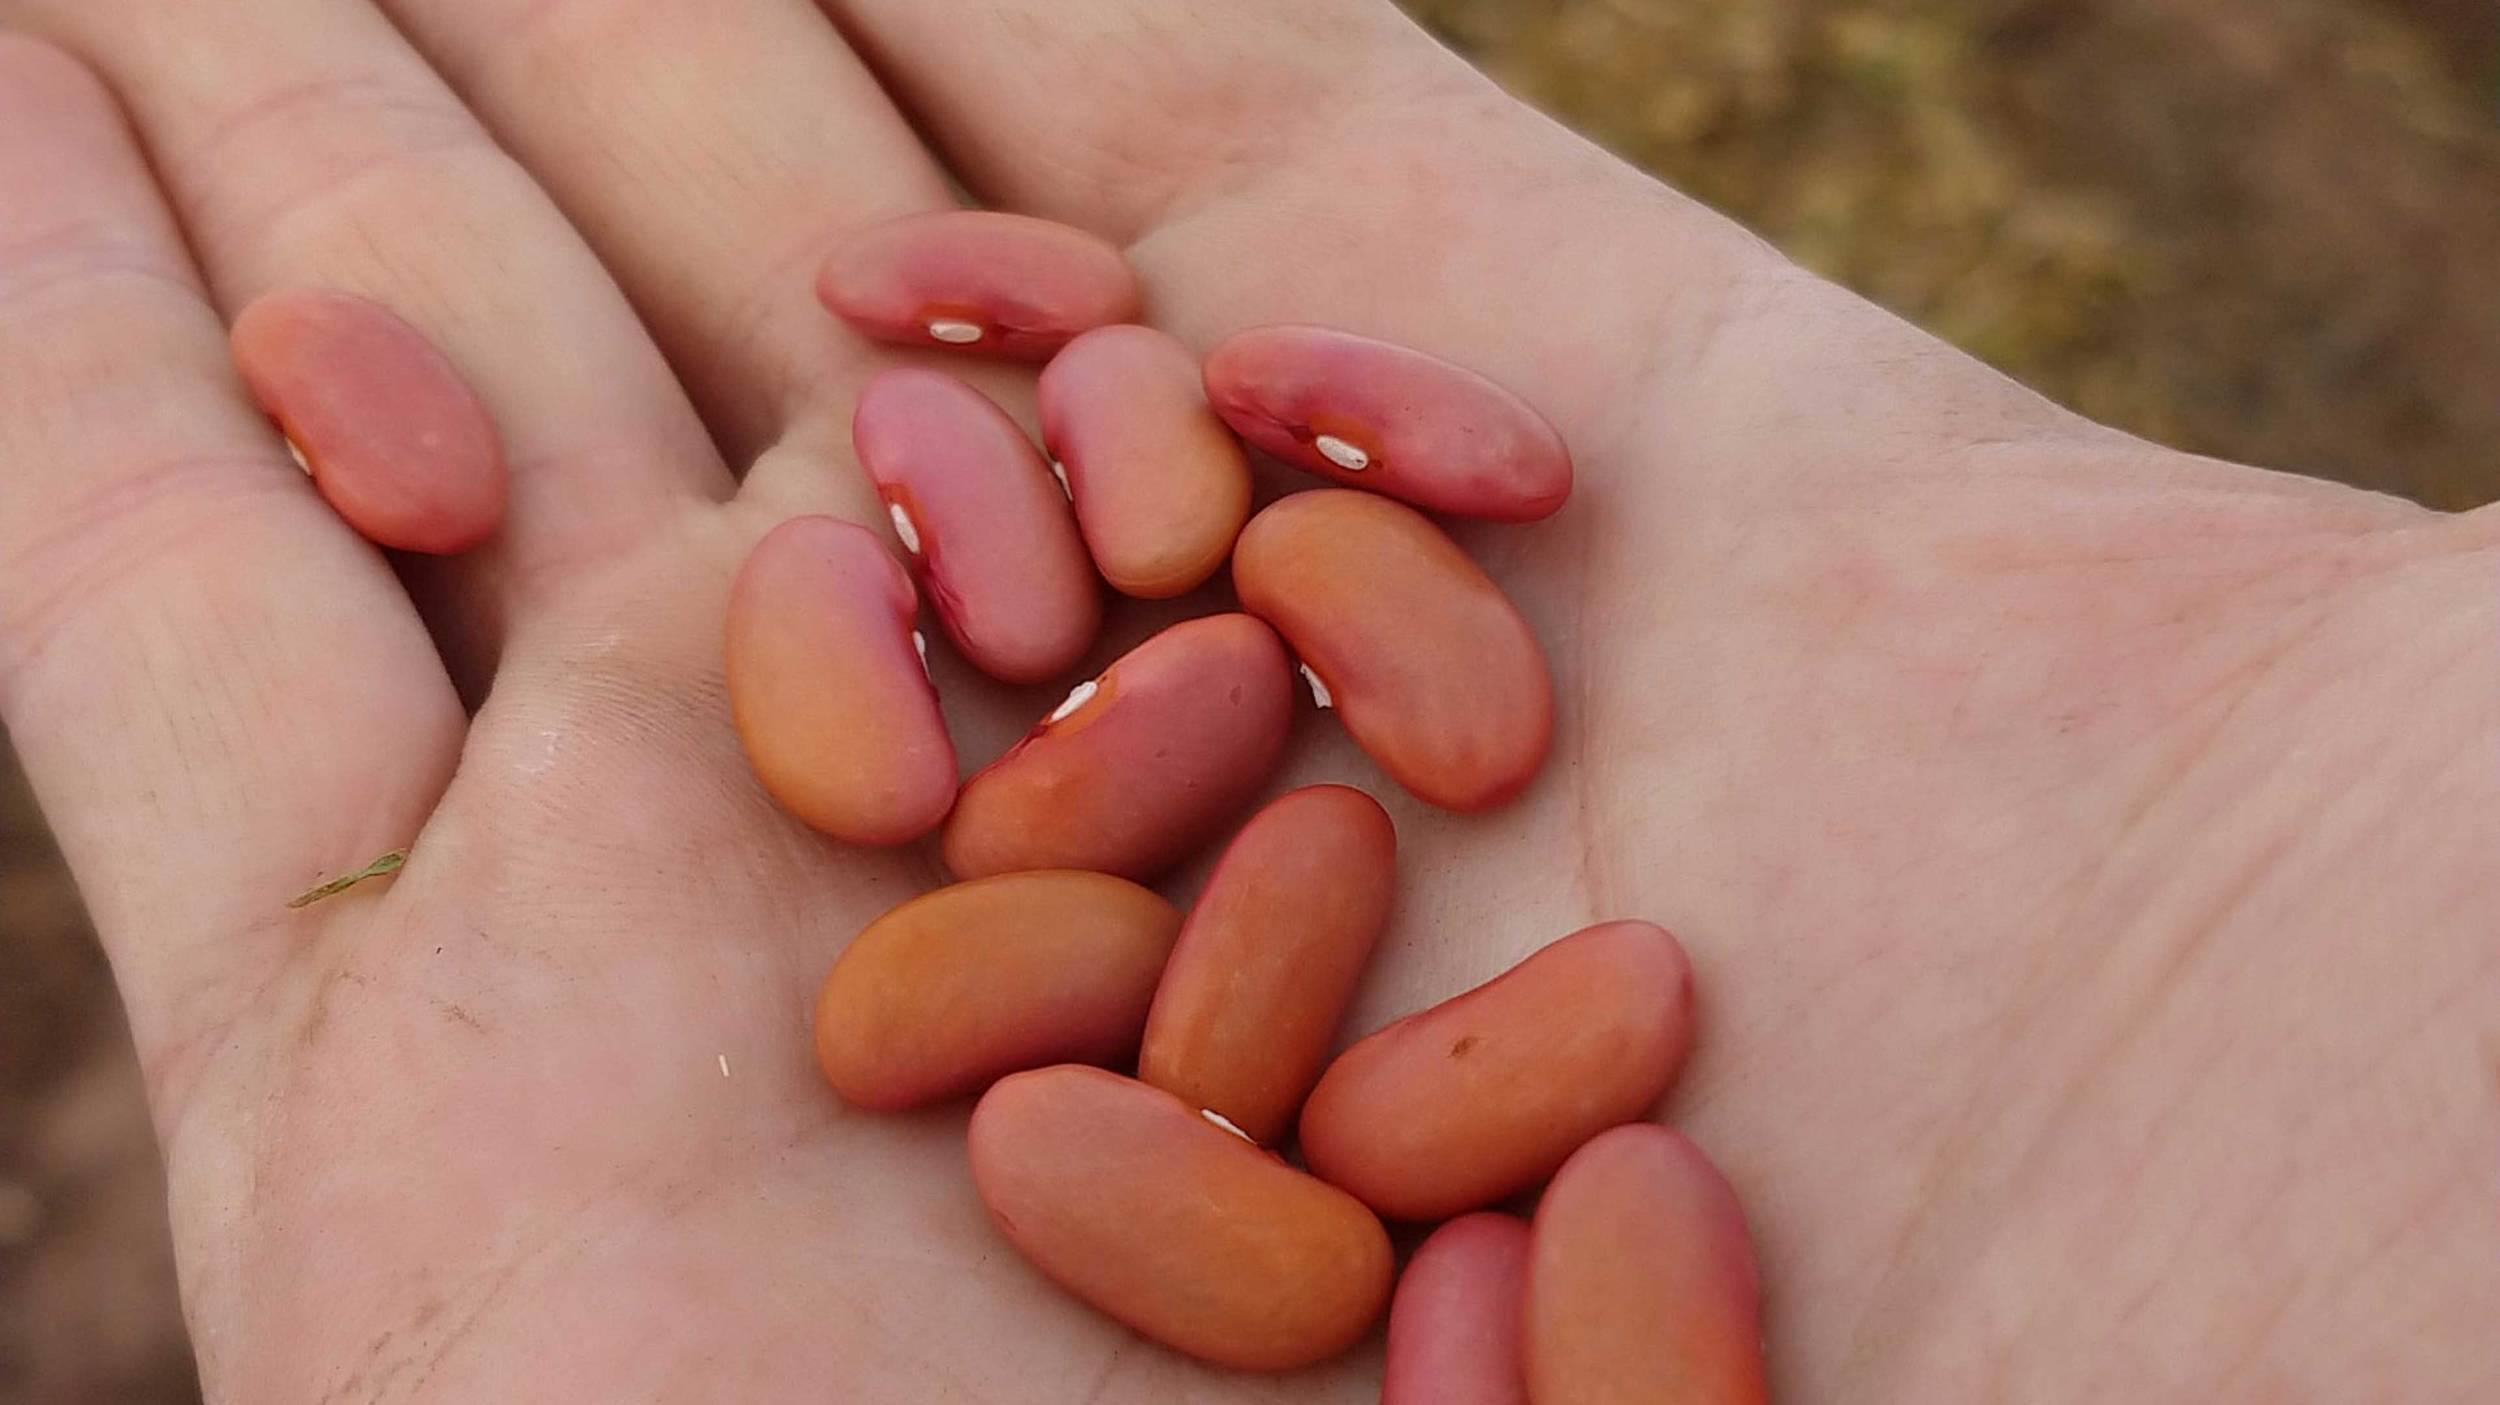 Light red kidney beans are a rich source of plant-based protein, an excellent source of fibre, and are naturally low in fat and sodium.